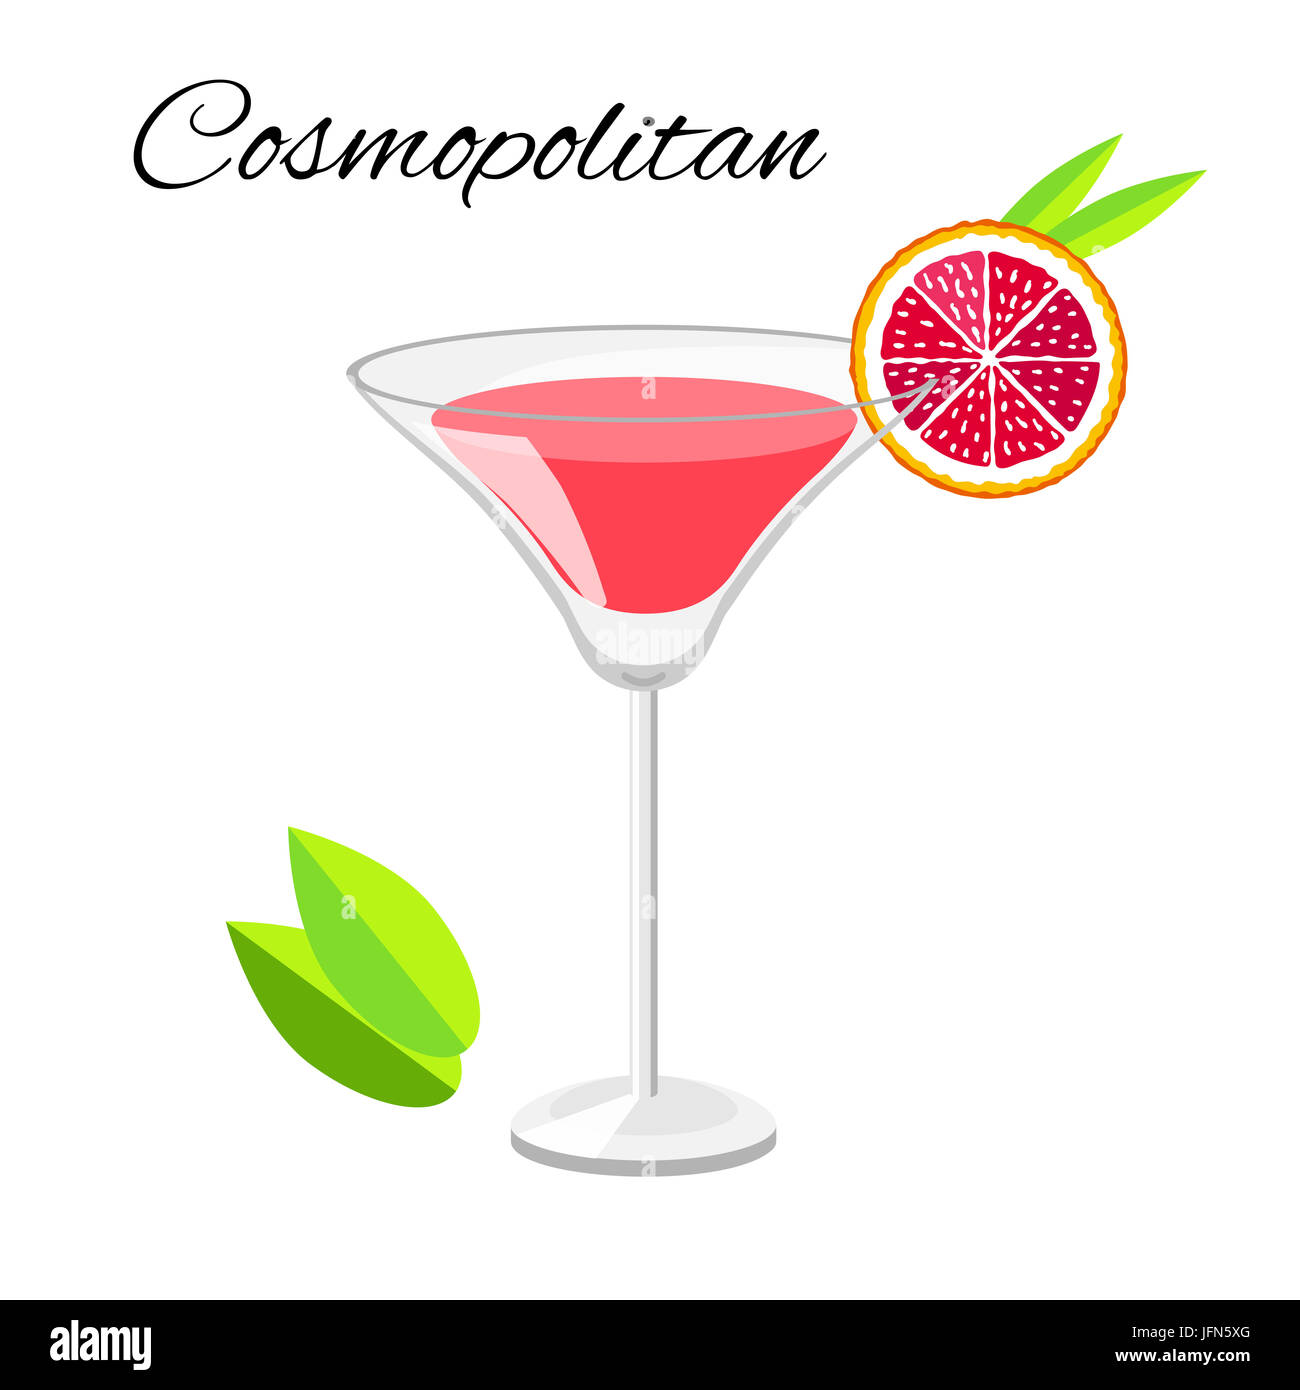 Popular Cosmopolitan cocktail cartoon style. Summer long drink isolated on white for restaurant, bar menu or beach party banner and flyer Stock Photo